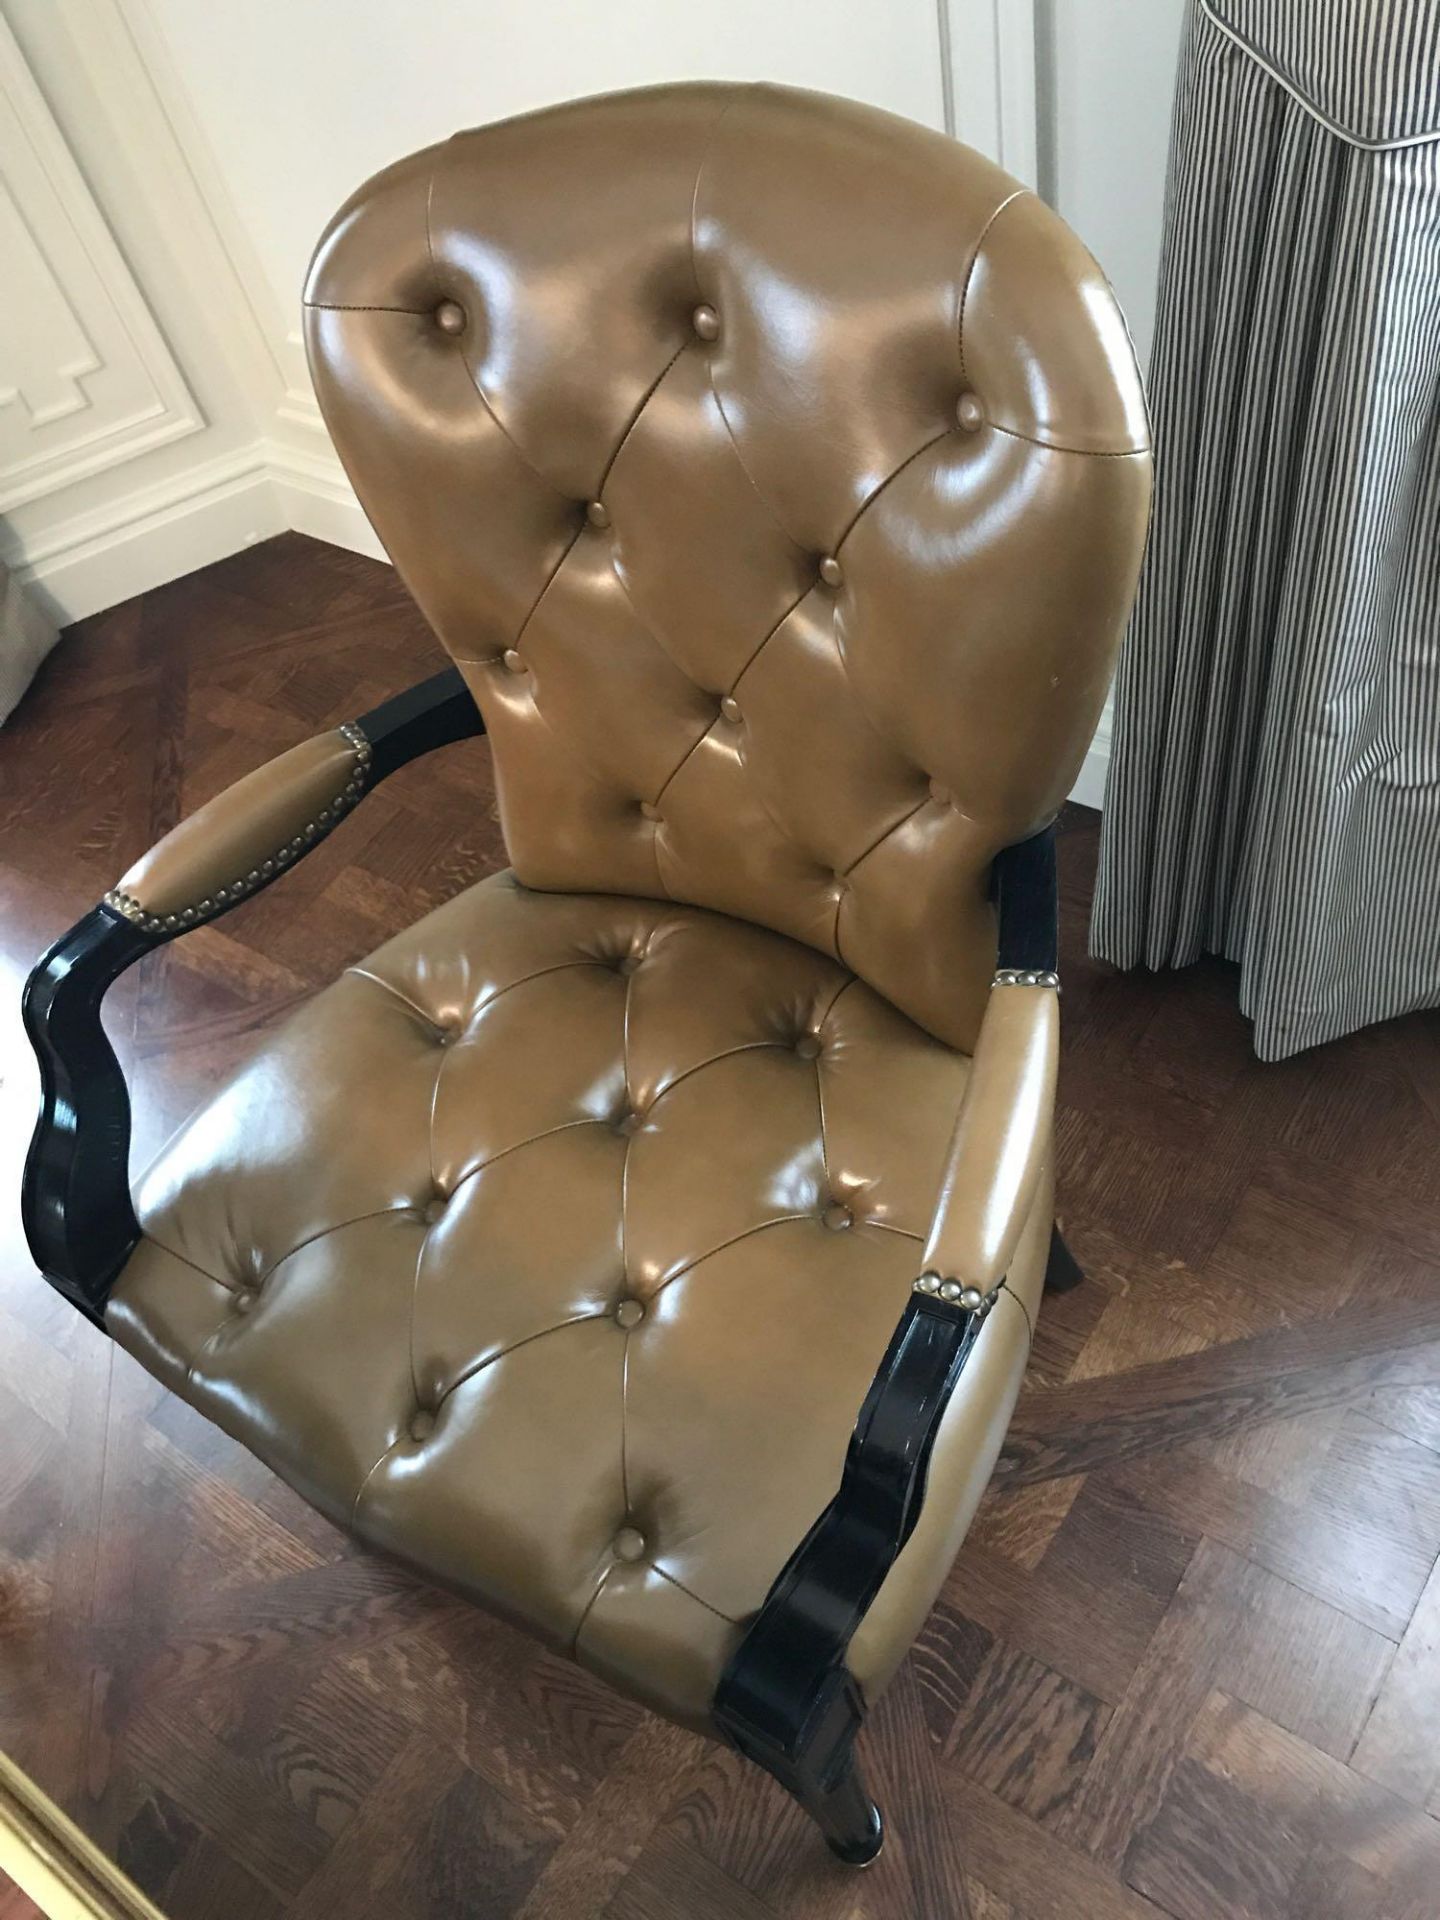 A Leather Tufted Armchair With Chesterfield Style Button And Stud Detail 60 x 63 x 95cm Room 606/7